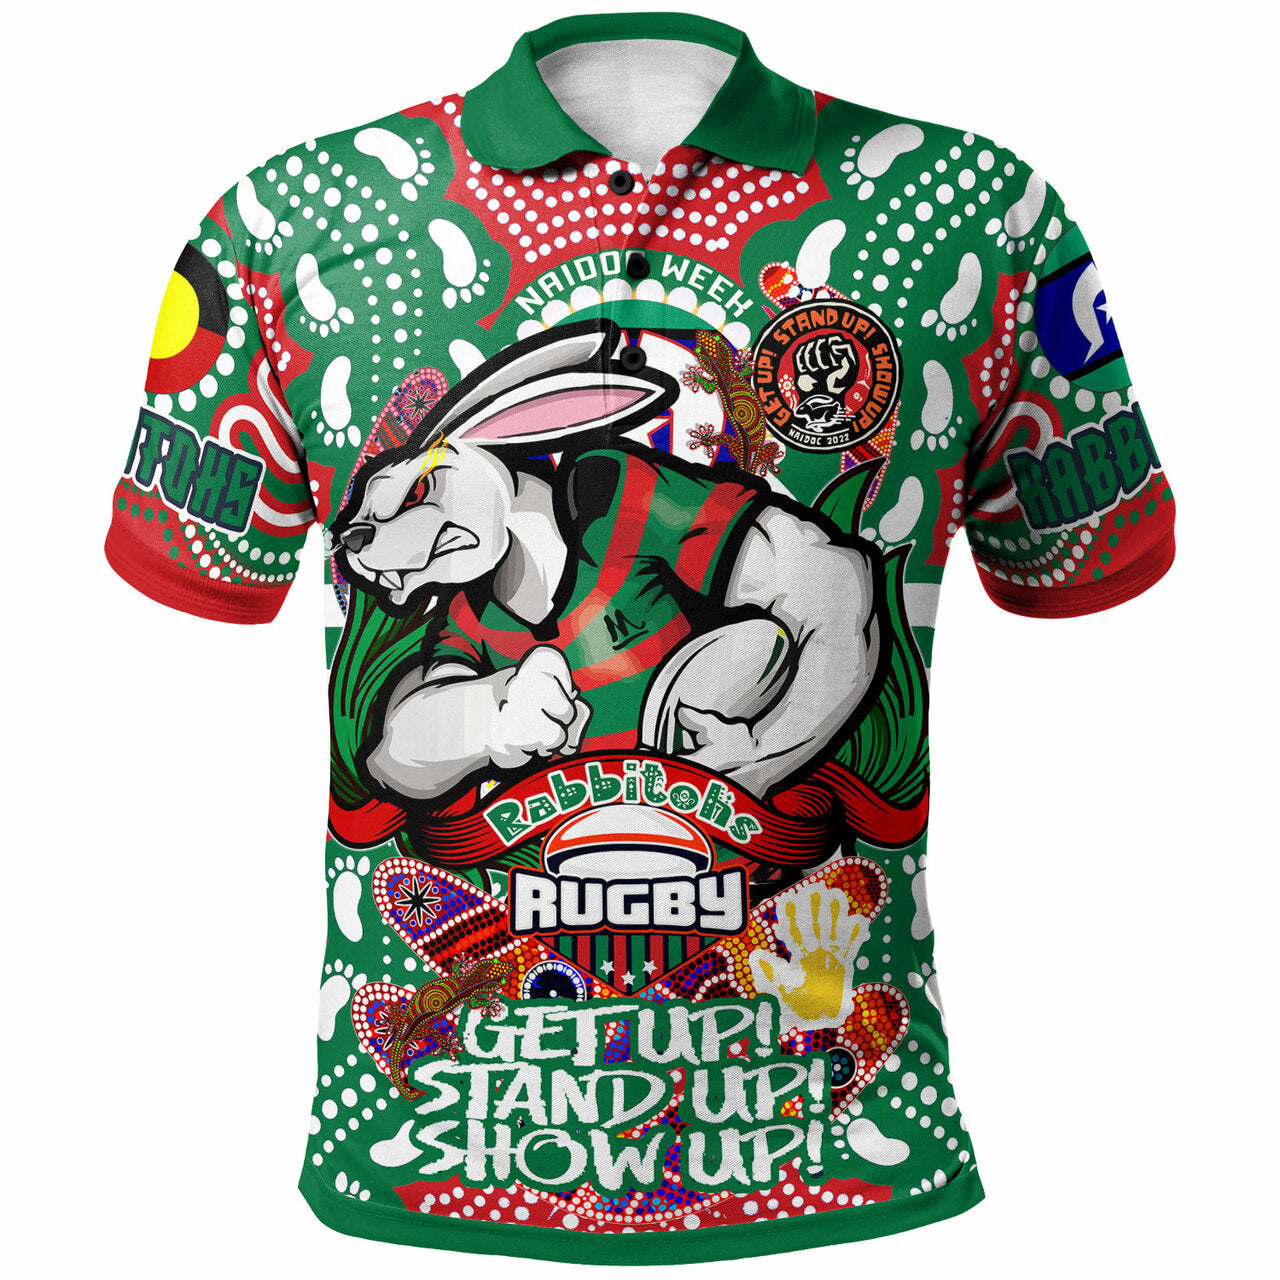 rabbitohs-rugby-naidoc-week-polo-shirt-south-sydney-rabbitohs-with-aboriginal-and-torres-strait-islander-culture-rlt12